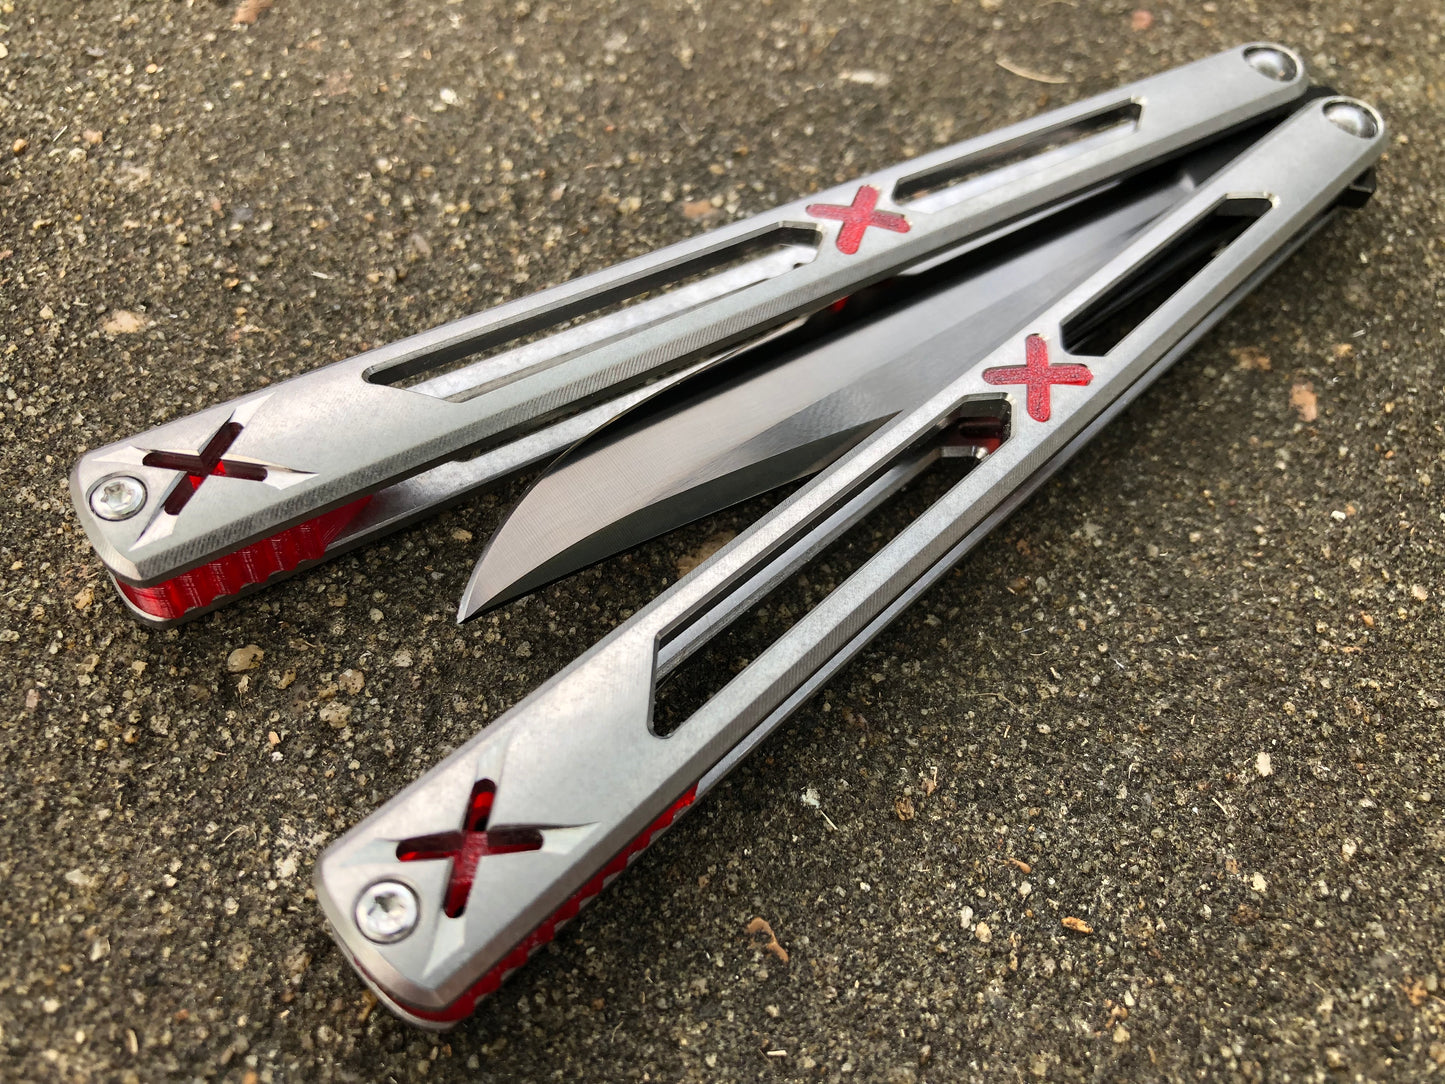 Made by Bxndxge Knives (Bandage, not bondage!) in collaboration with Zippy, the "Stitch" handles are a Titanium rehandle mod compatible with blades from both the BRS Replicant and Squid Industries Krake Raken balisongs.